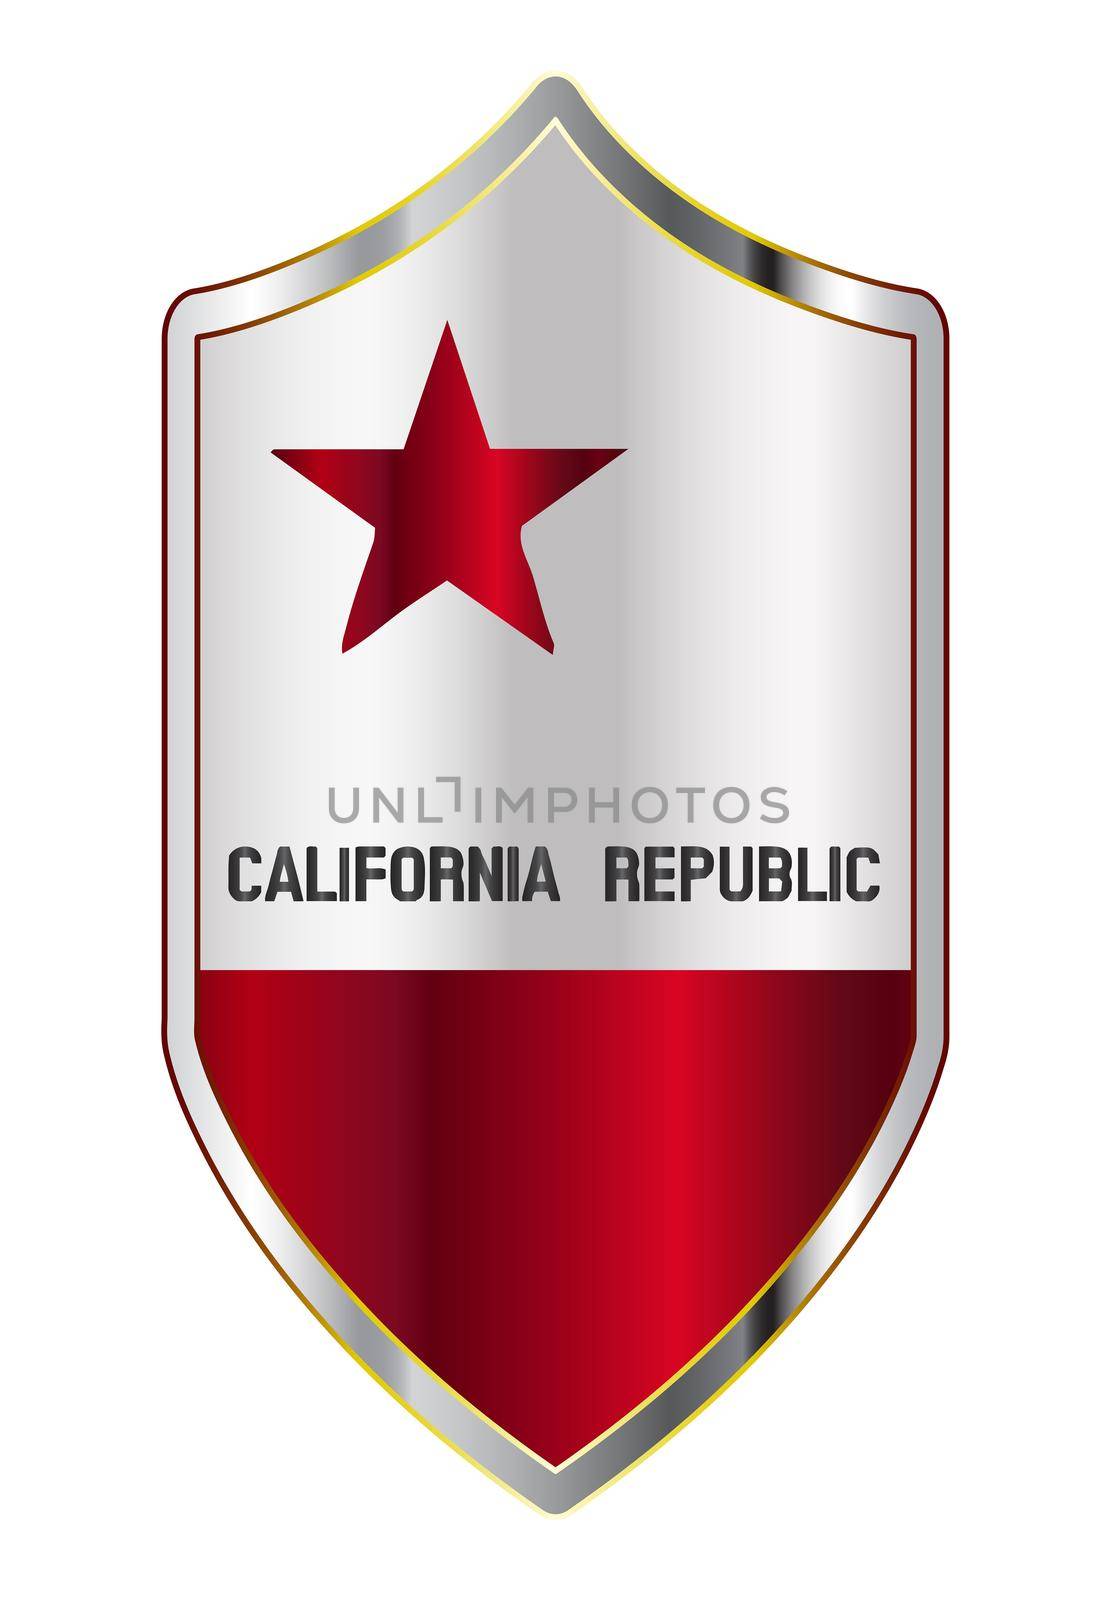 A typical crusader type shield with the state flag of California all isolated on a white background